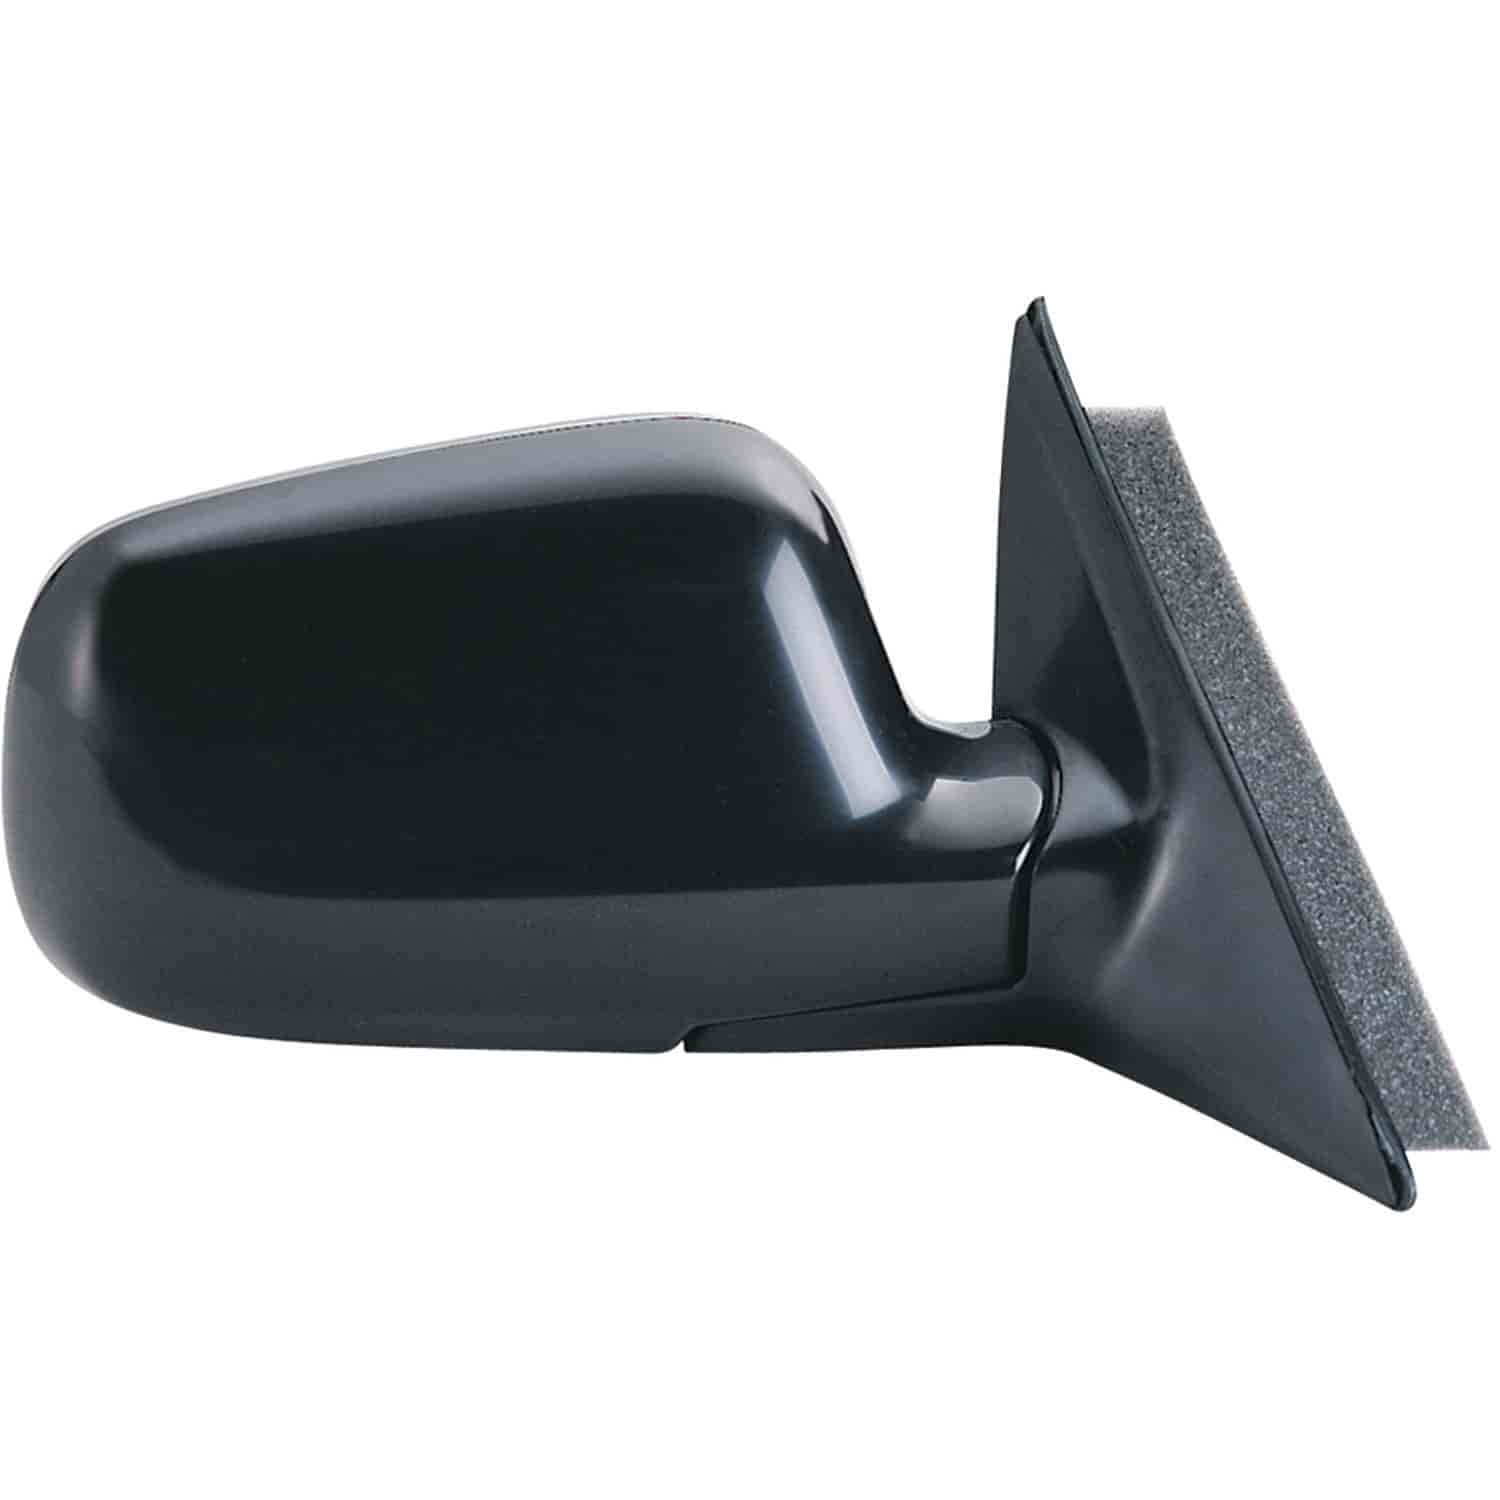 OEM Style Replacement mirror for 94-97 Honda Accord